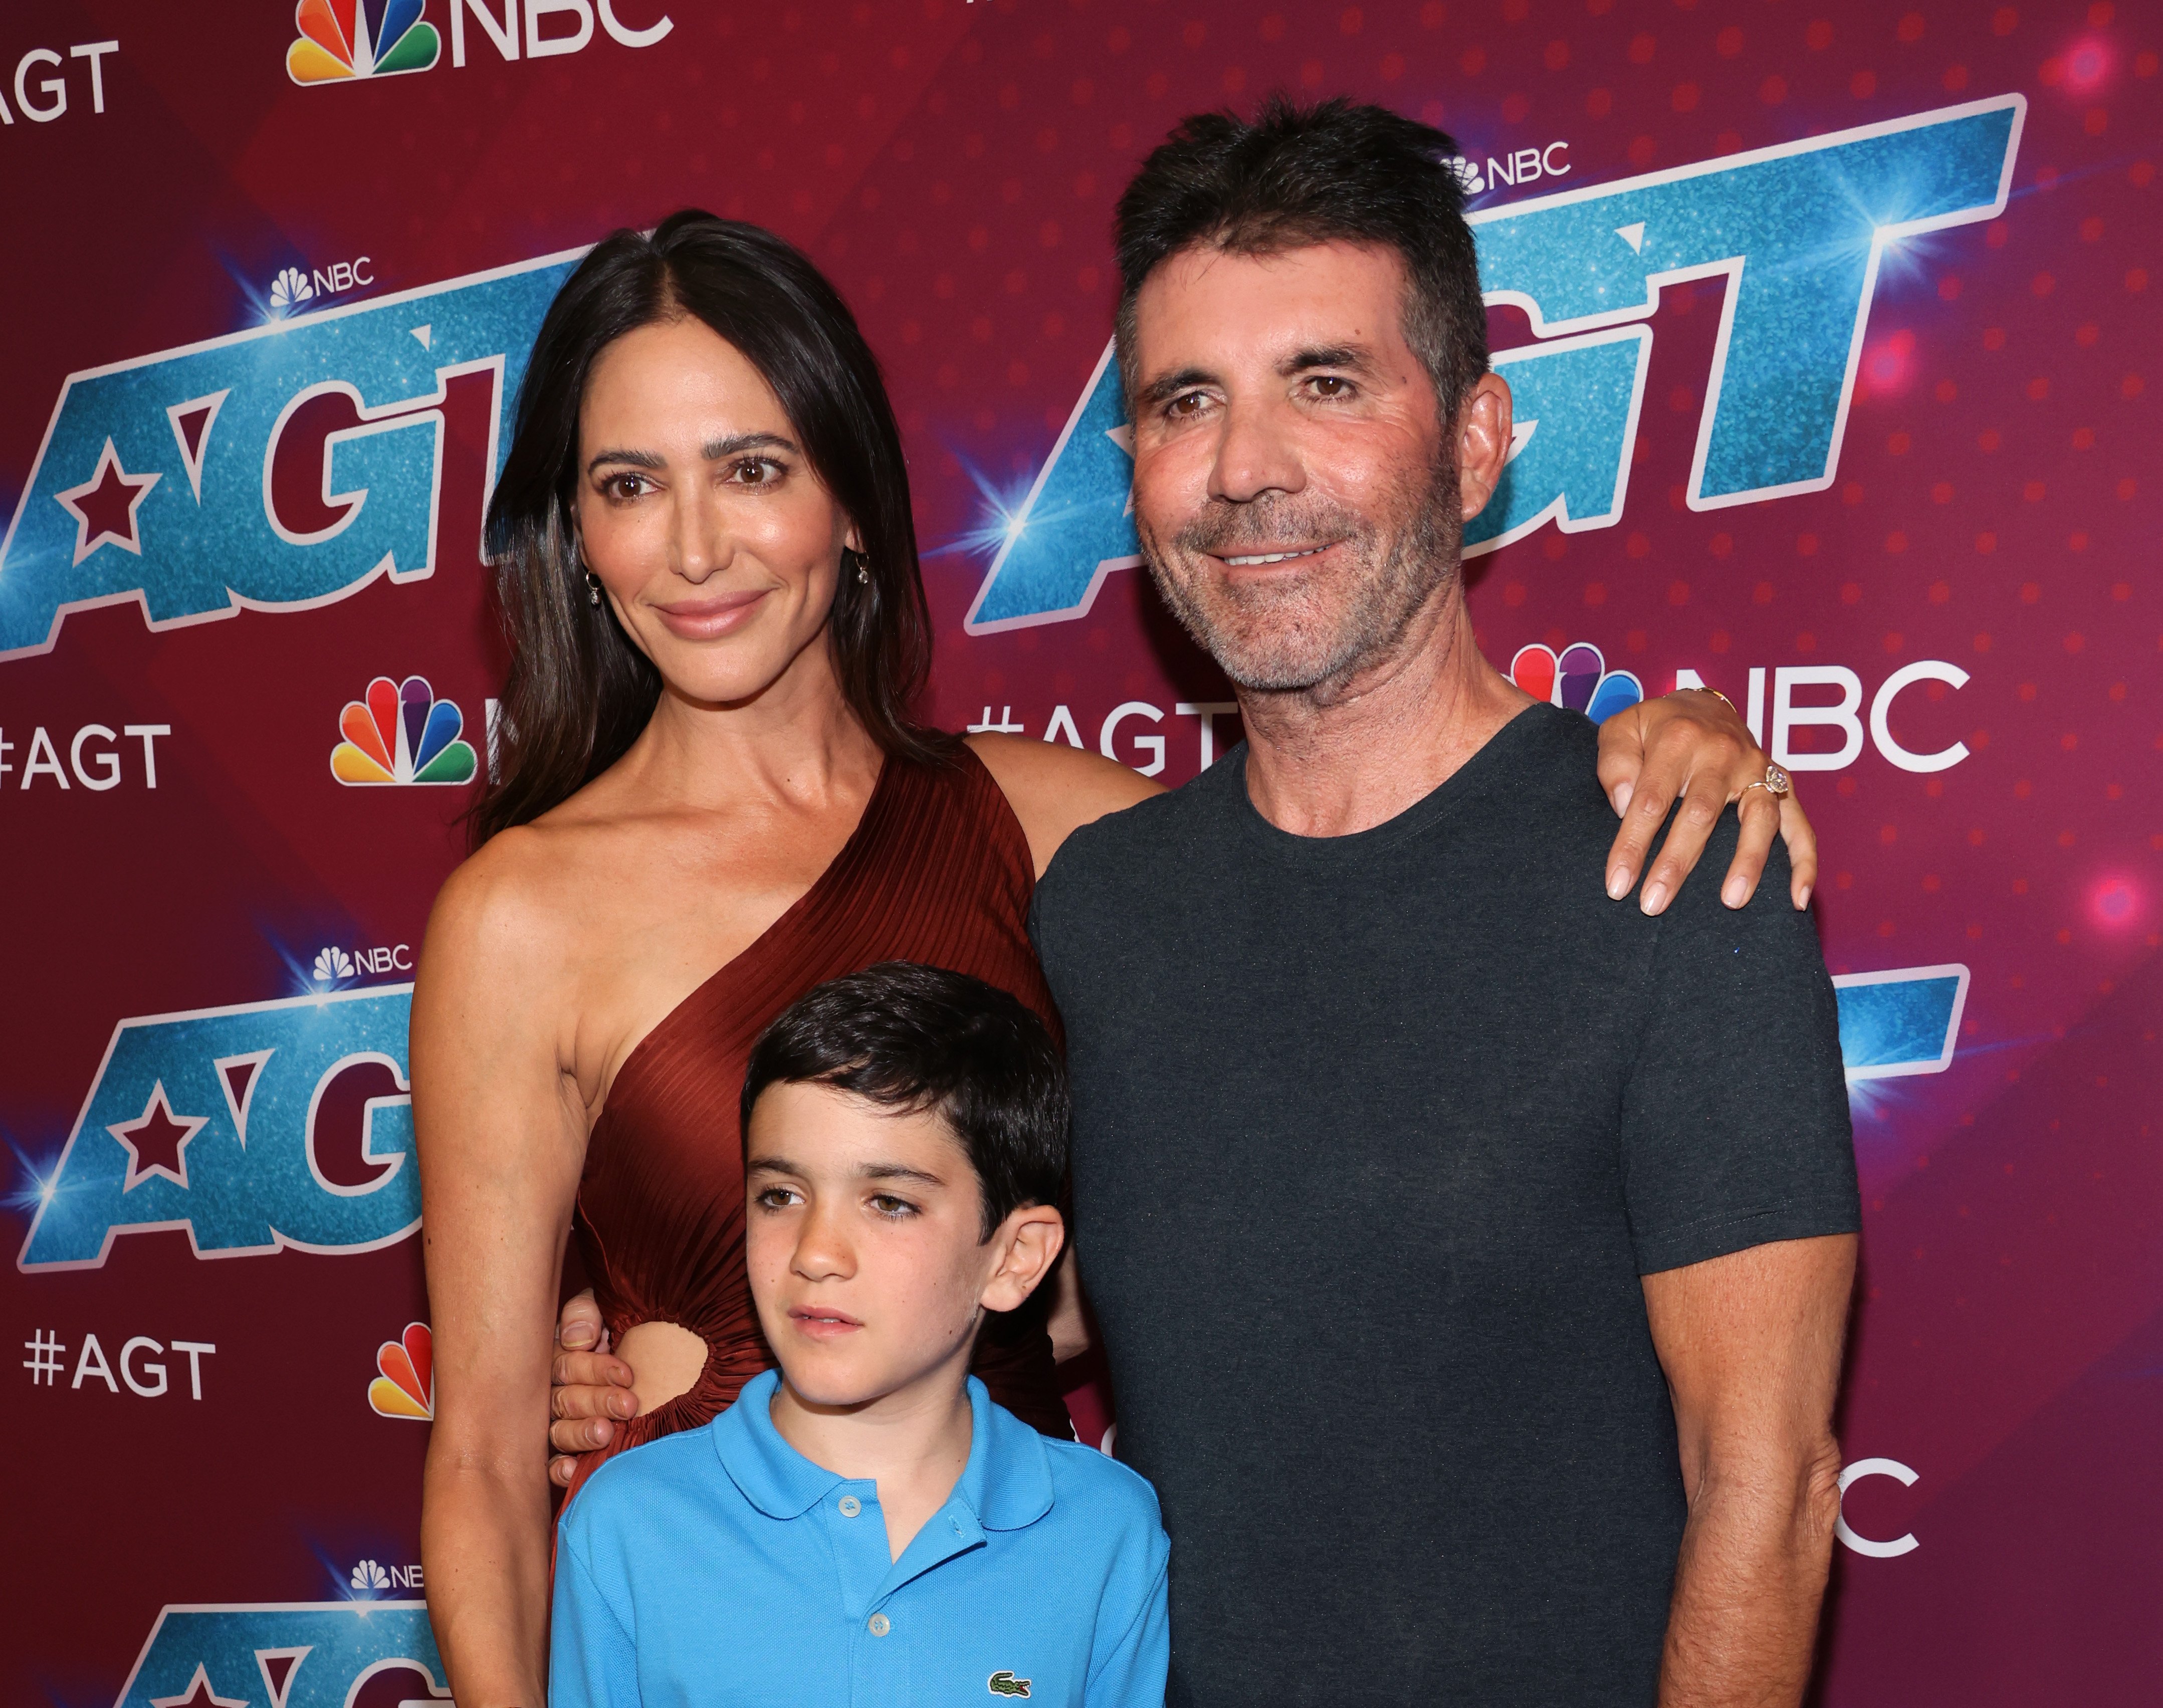 Simon Cowell's Ups & Downs with Siblings One of His Brothers Did Not